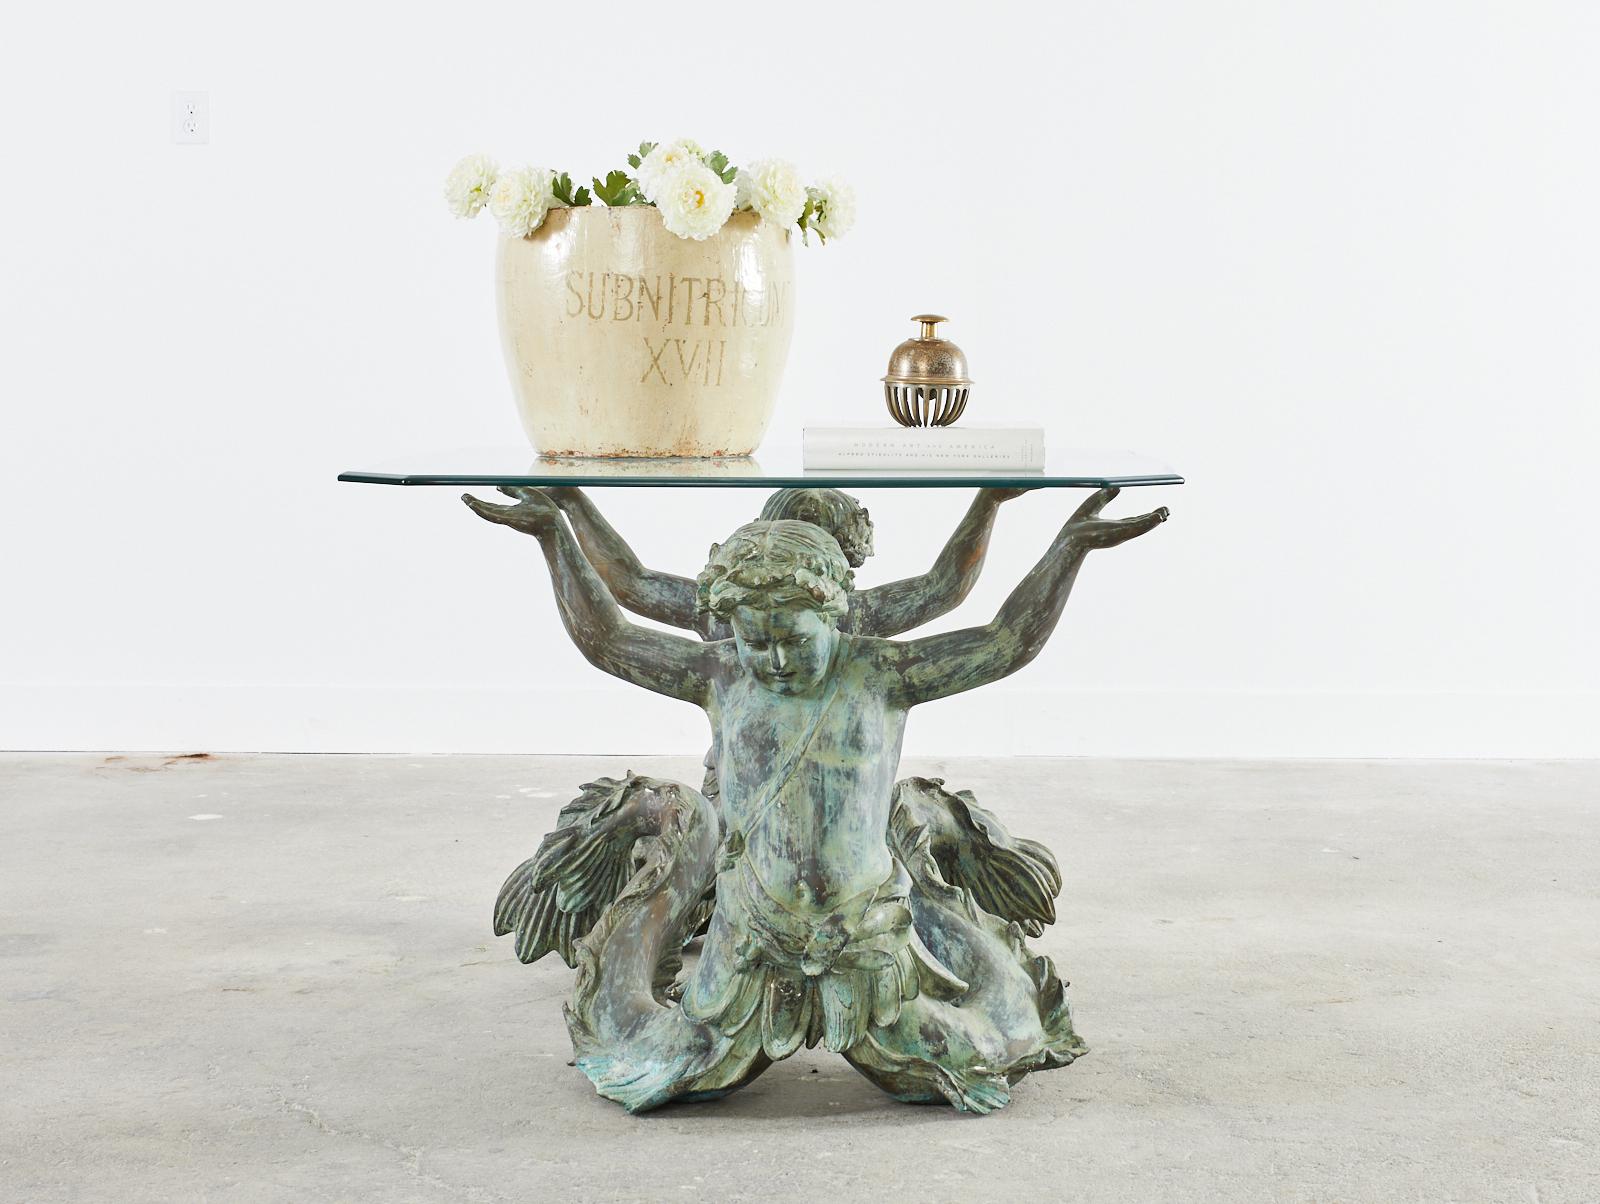 Exceptional Italian bronze center table featuring a pair of mermen or putti di mare. The bronze has a lovely patinated finish with verdigris. The base alone measures 45 inches wide by 30 inches deep depicting two mermen back to back with